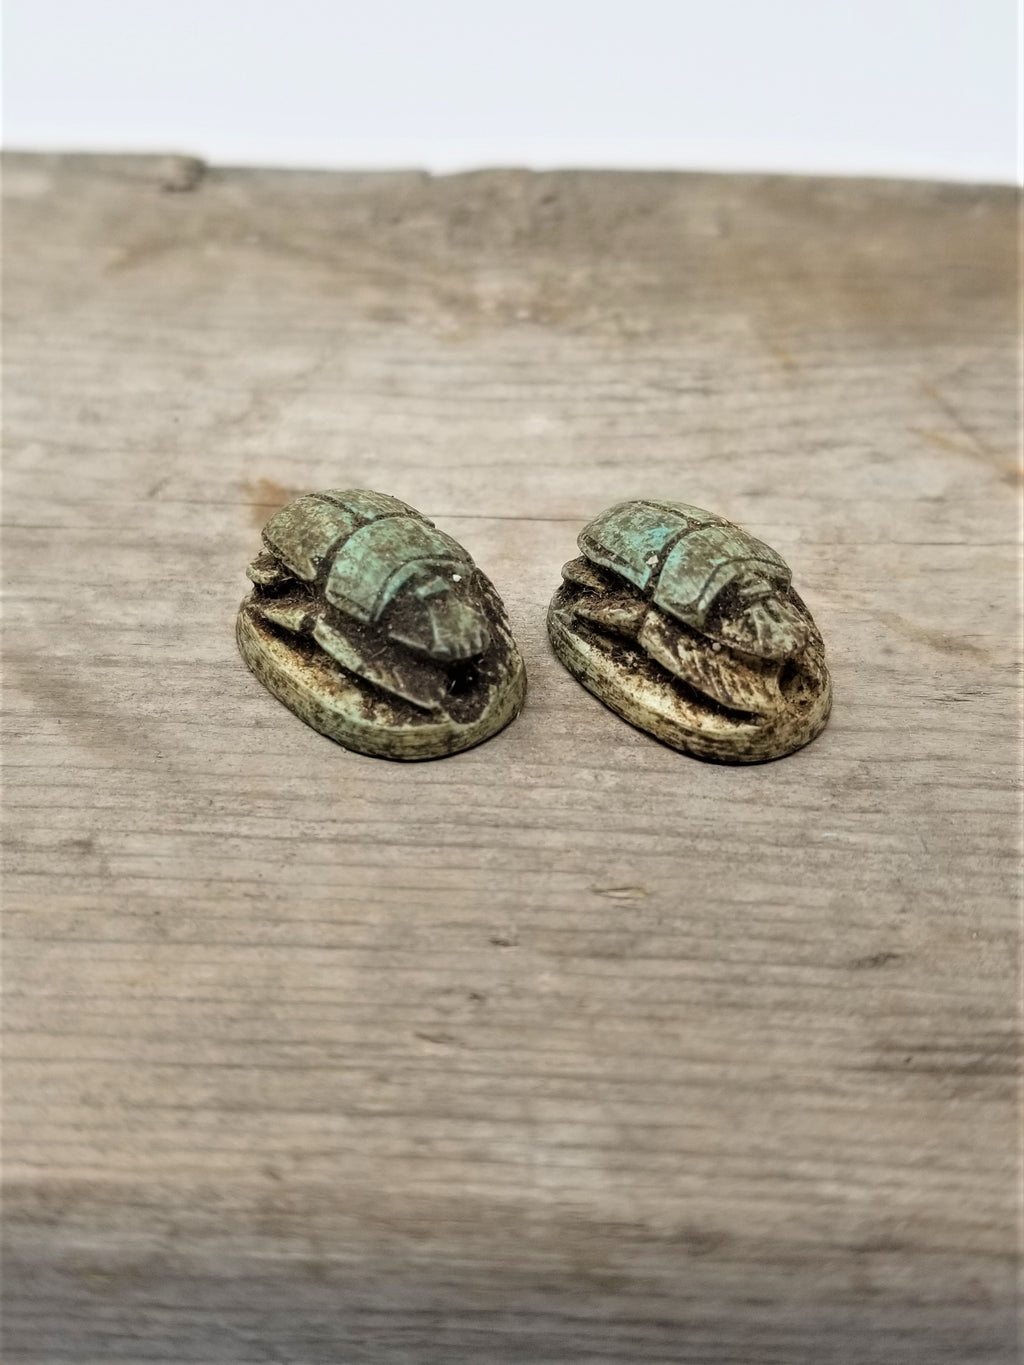 Vintage Scarab Beads from Egypt